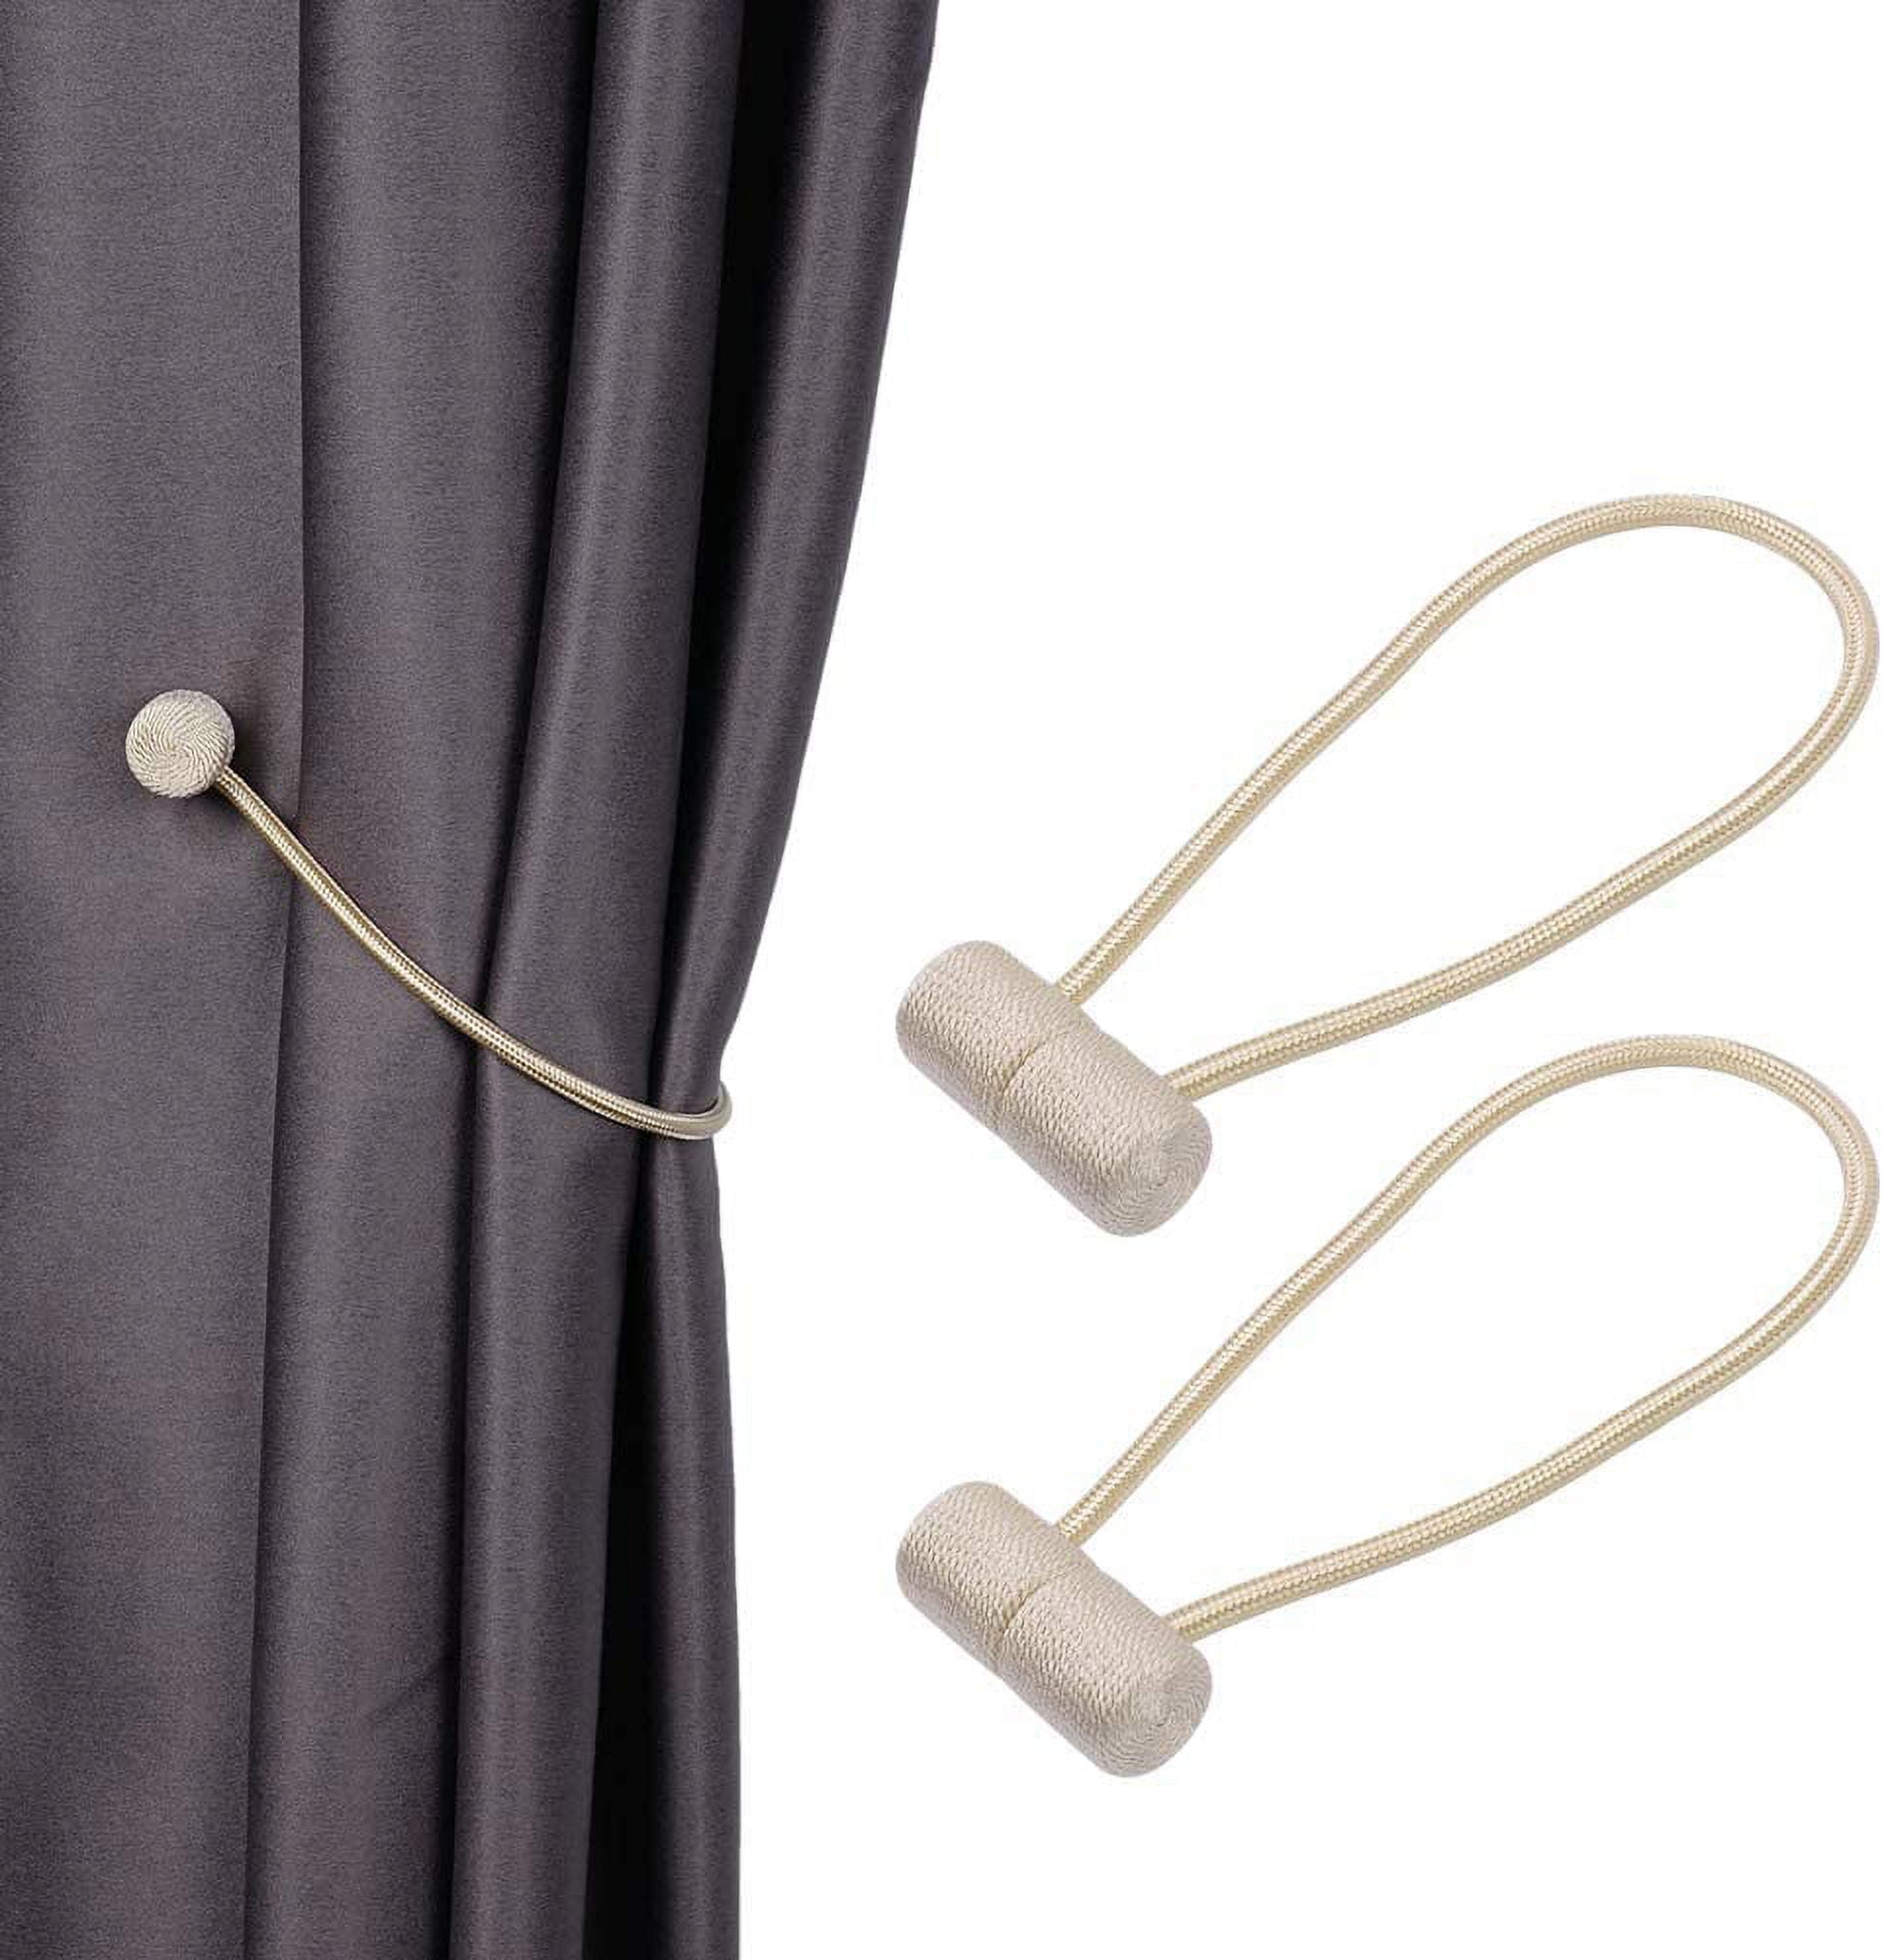 Magnetic Curtain Tie Backs Rope Clips Ball Buckle Holder Home Window Decor  Gifts